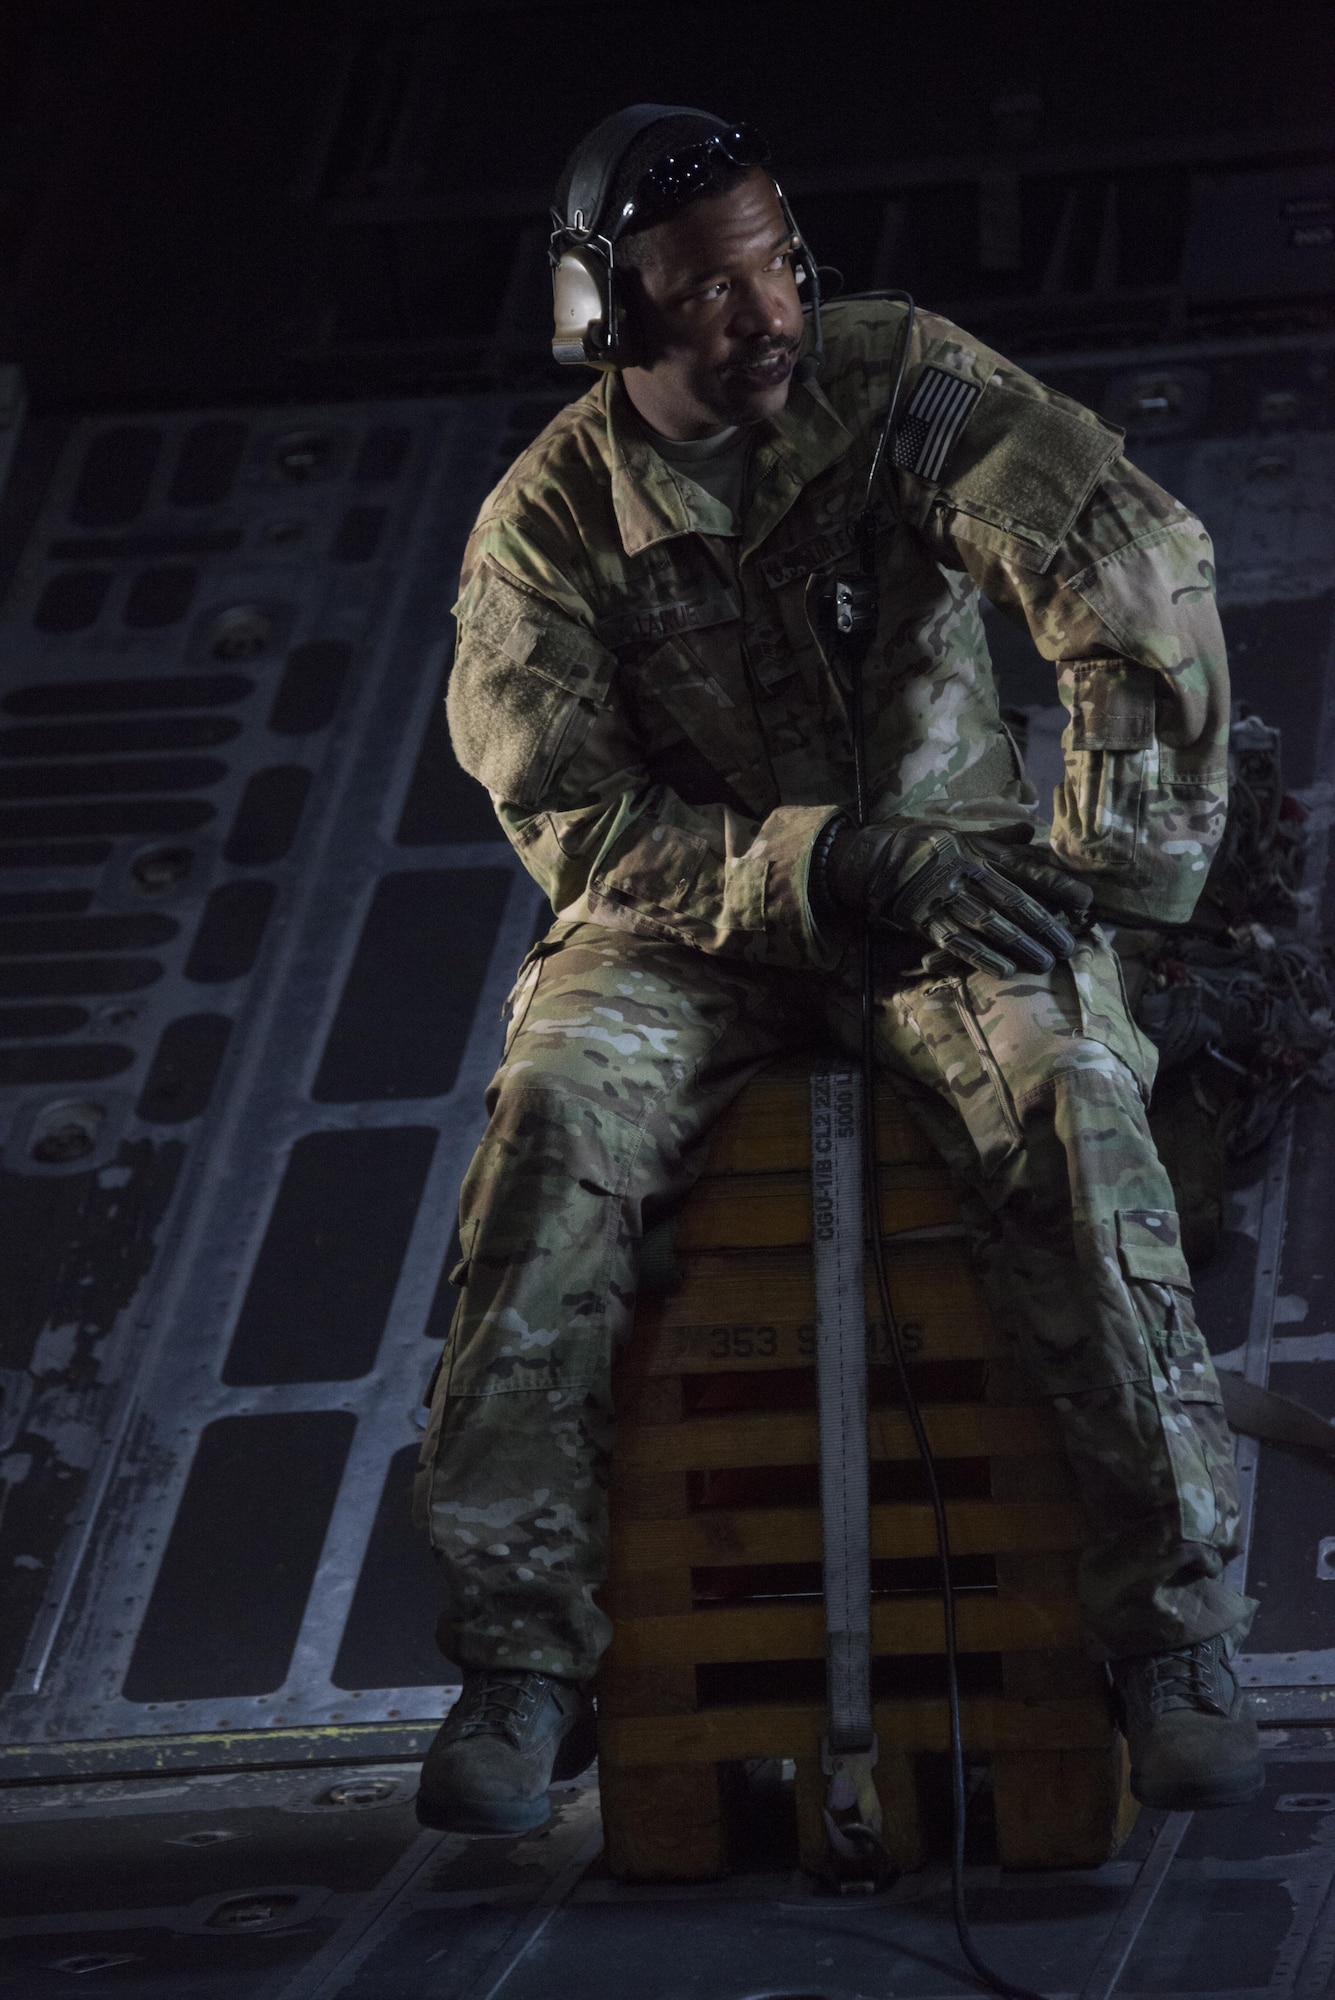 Staff Sgt. Shaun LaRue, 1st Special Operations Squadron loadmaster, sits in the back of an MC-130H Combat Talon II prior to take-off. The 1st SOS crew participated in low-level air intercept training with three F-16C Fighting Falcons from the 35th Fighter Squadron at Kunsan Air Base, Oct. 19, 2016. (U.S. Air Force photo by Capt. Jessica Tait)